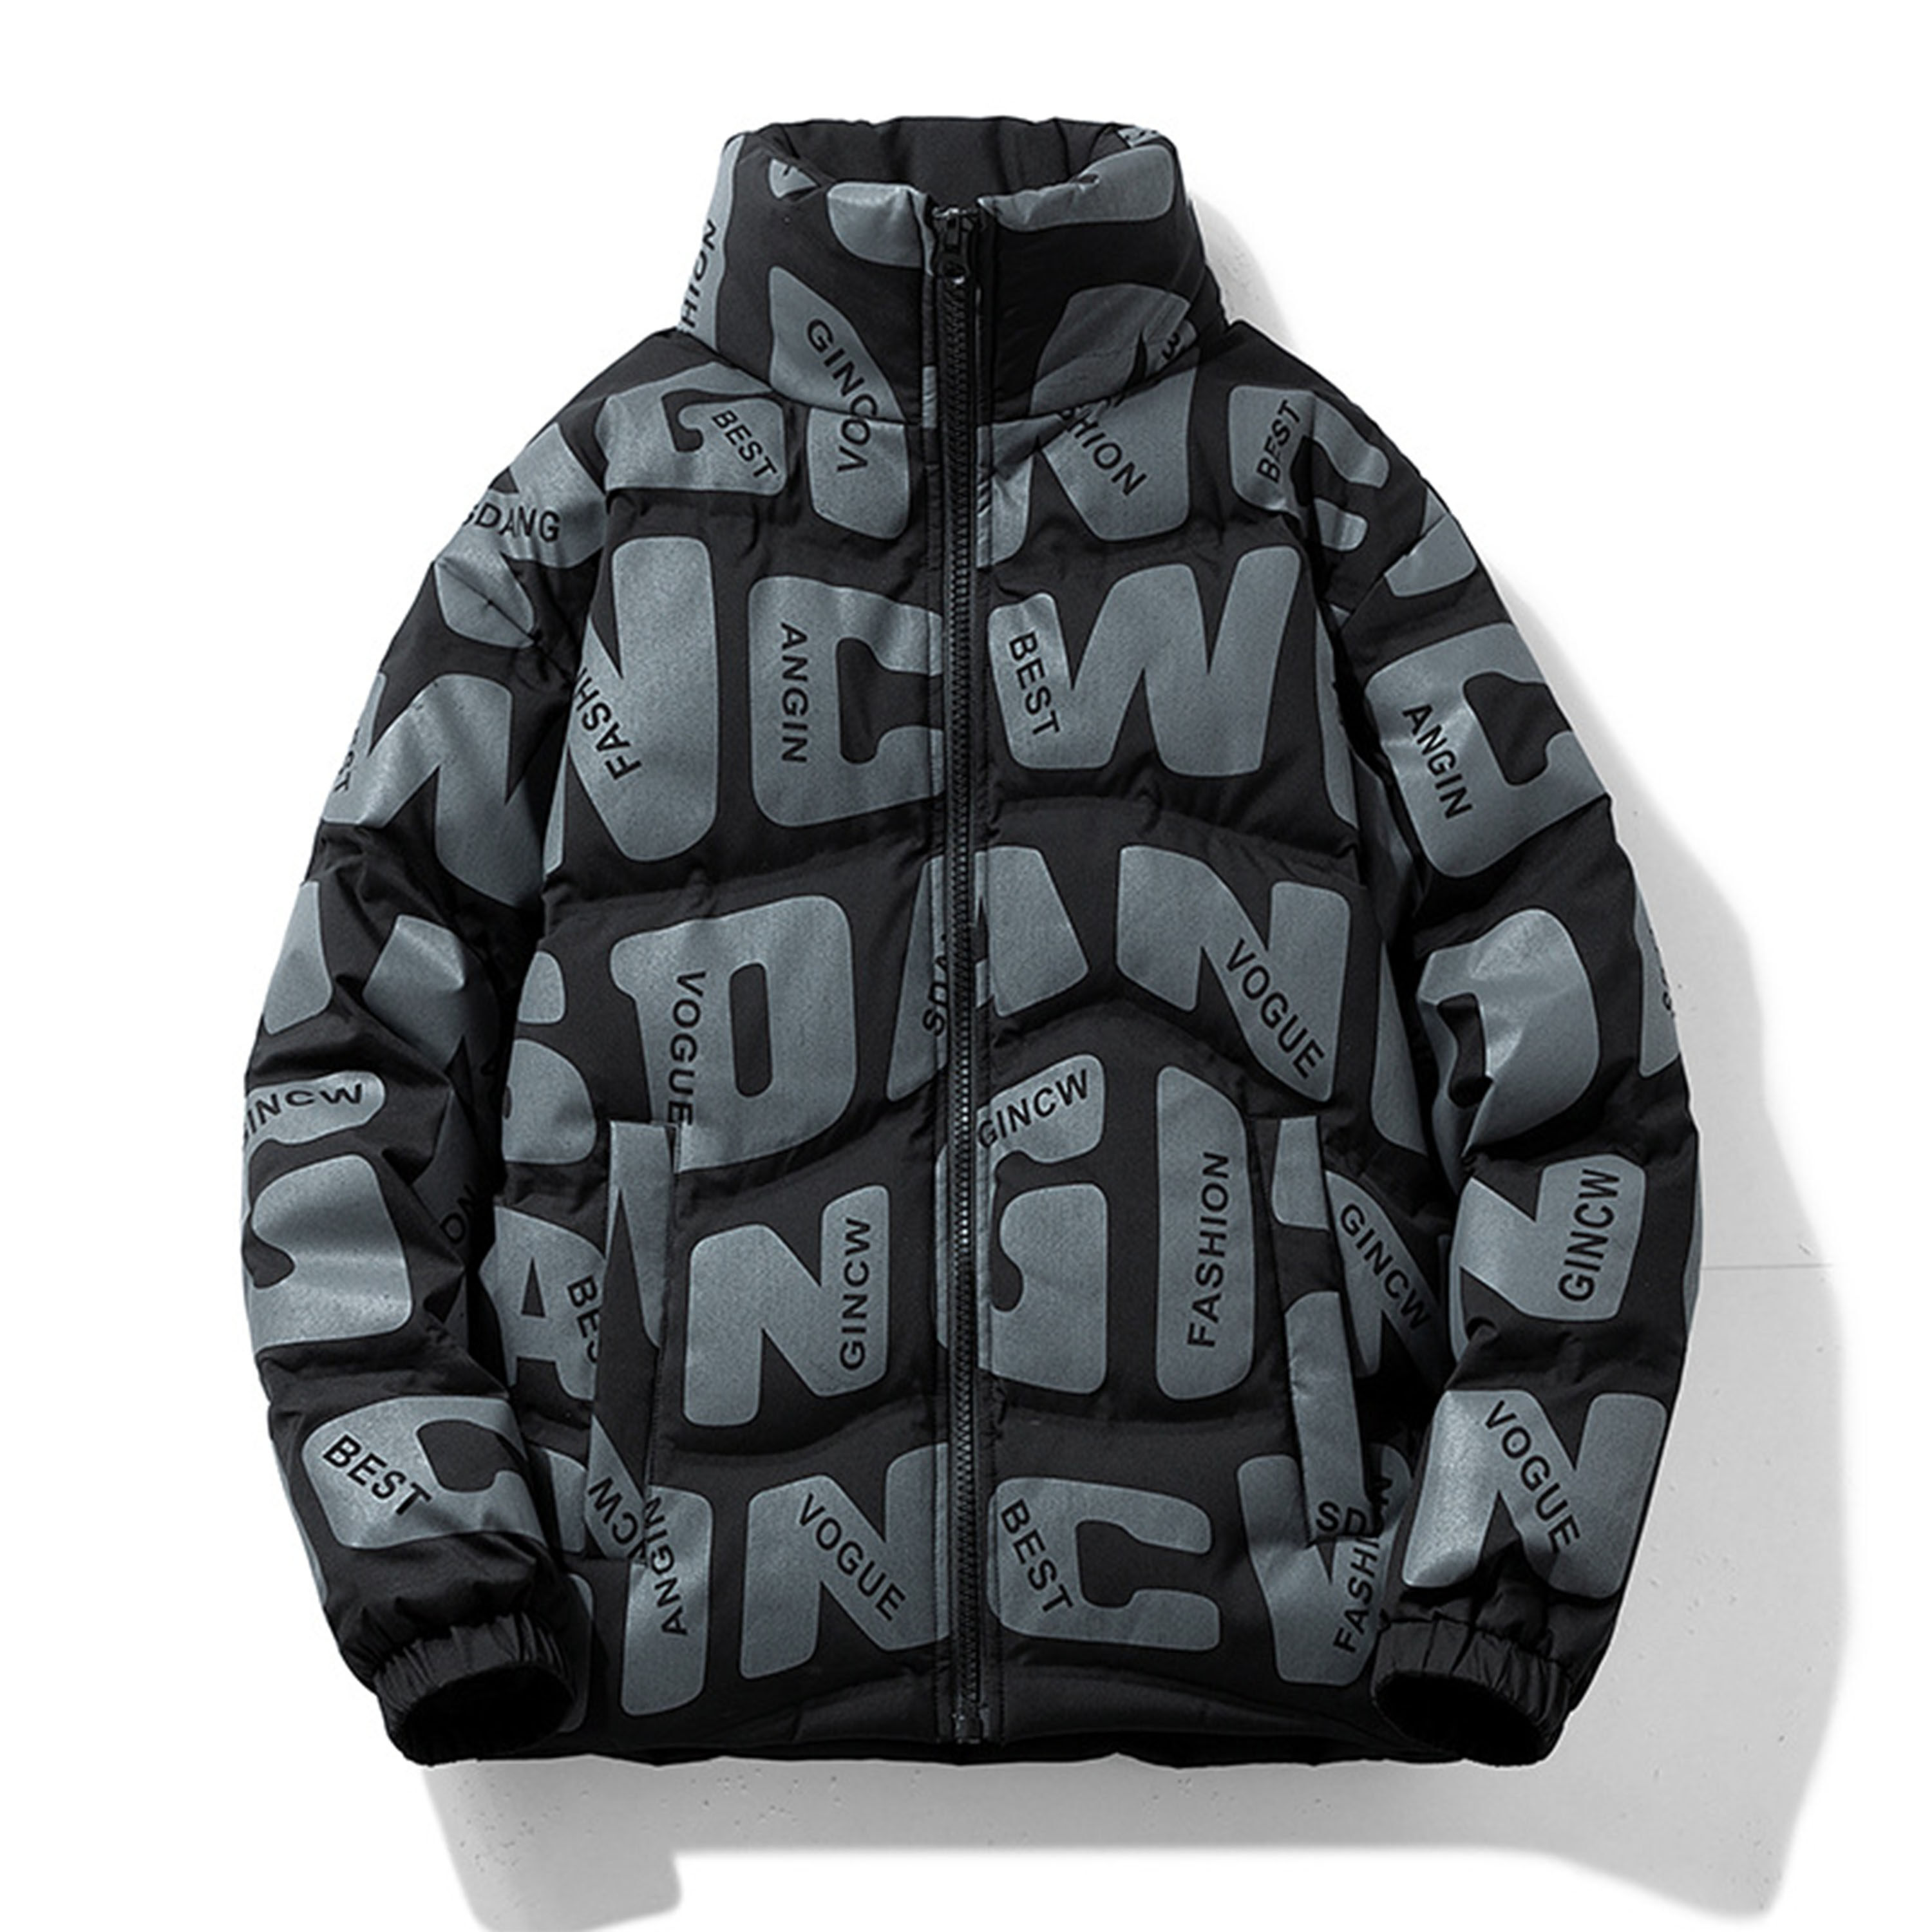 Jacket, Puffer Jacket, 80% Duck Down Filling, Resistant To Cold Letter Print, Zipper Stand Collar